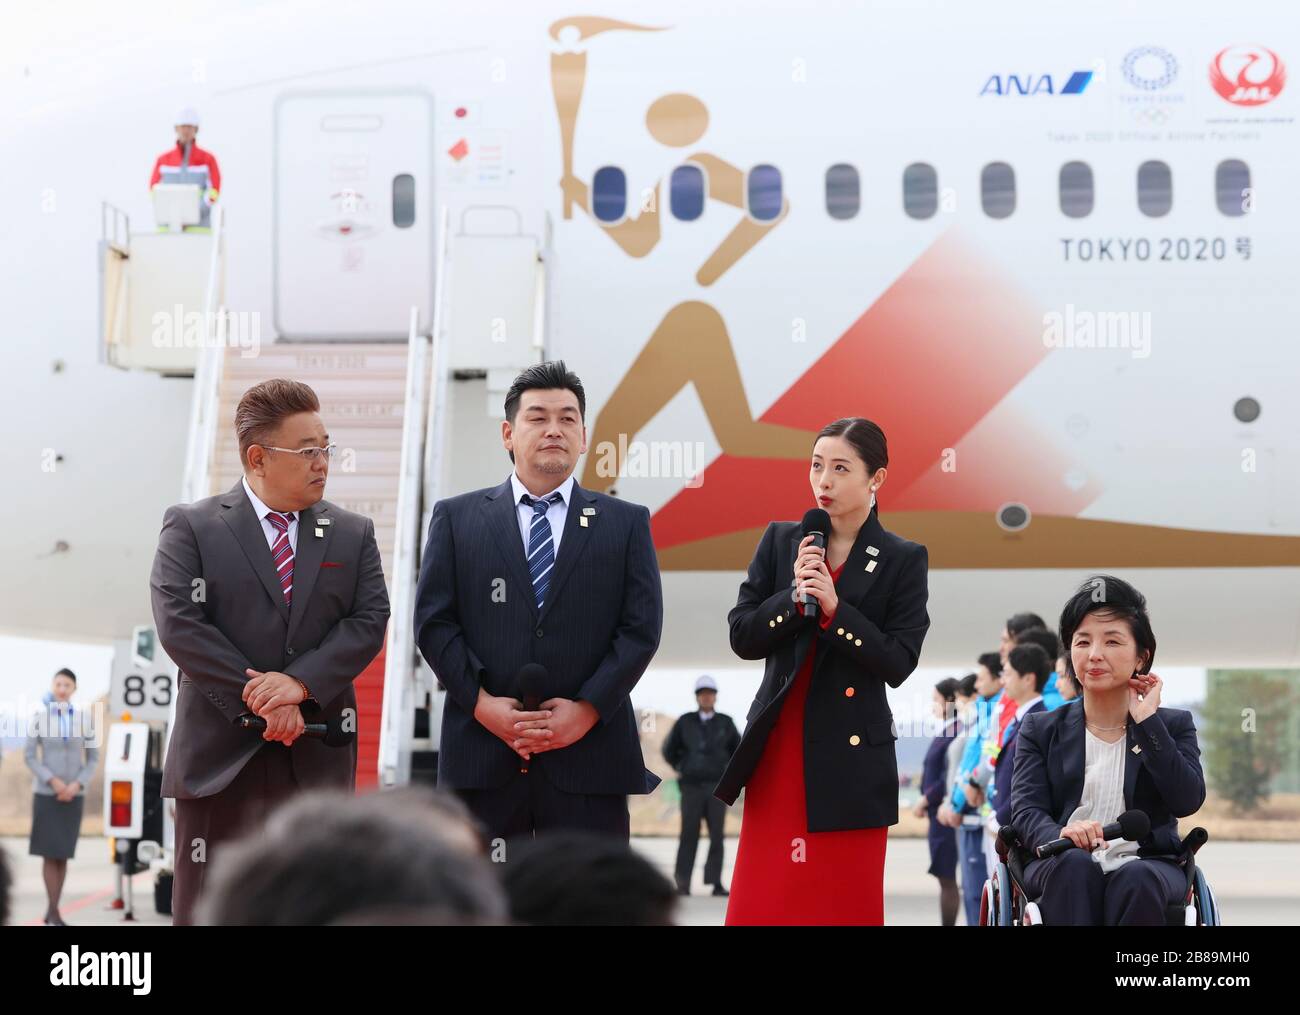 Higashi Matsushima, Japan. 20th Mar, 2020. (L-R) Japanese comedy duo members Mikio Date and Takeshi Tomizawa, actress Satomi Ishihara and Paralympian Aki Taguchi attend the arrival ceremony for the Olympic flame at the Matsushima air base in Higashi Matsushima in Miyagi prefecture, northern Japan on Friday, March 20, 2020. Tokyo 2020 Olympic Games will start from March 26 at Fukushima prefecture. Credit: Yoshio Tsunoda/AFLO/Alamy Live News Stock Photo